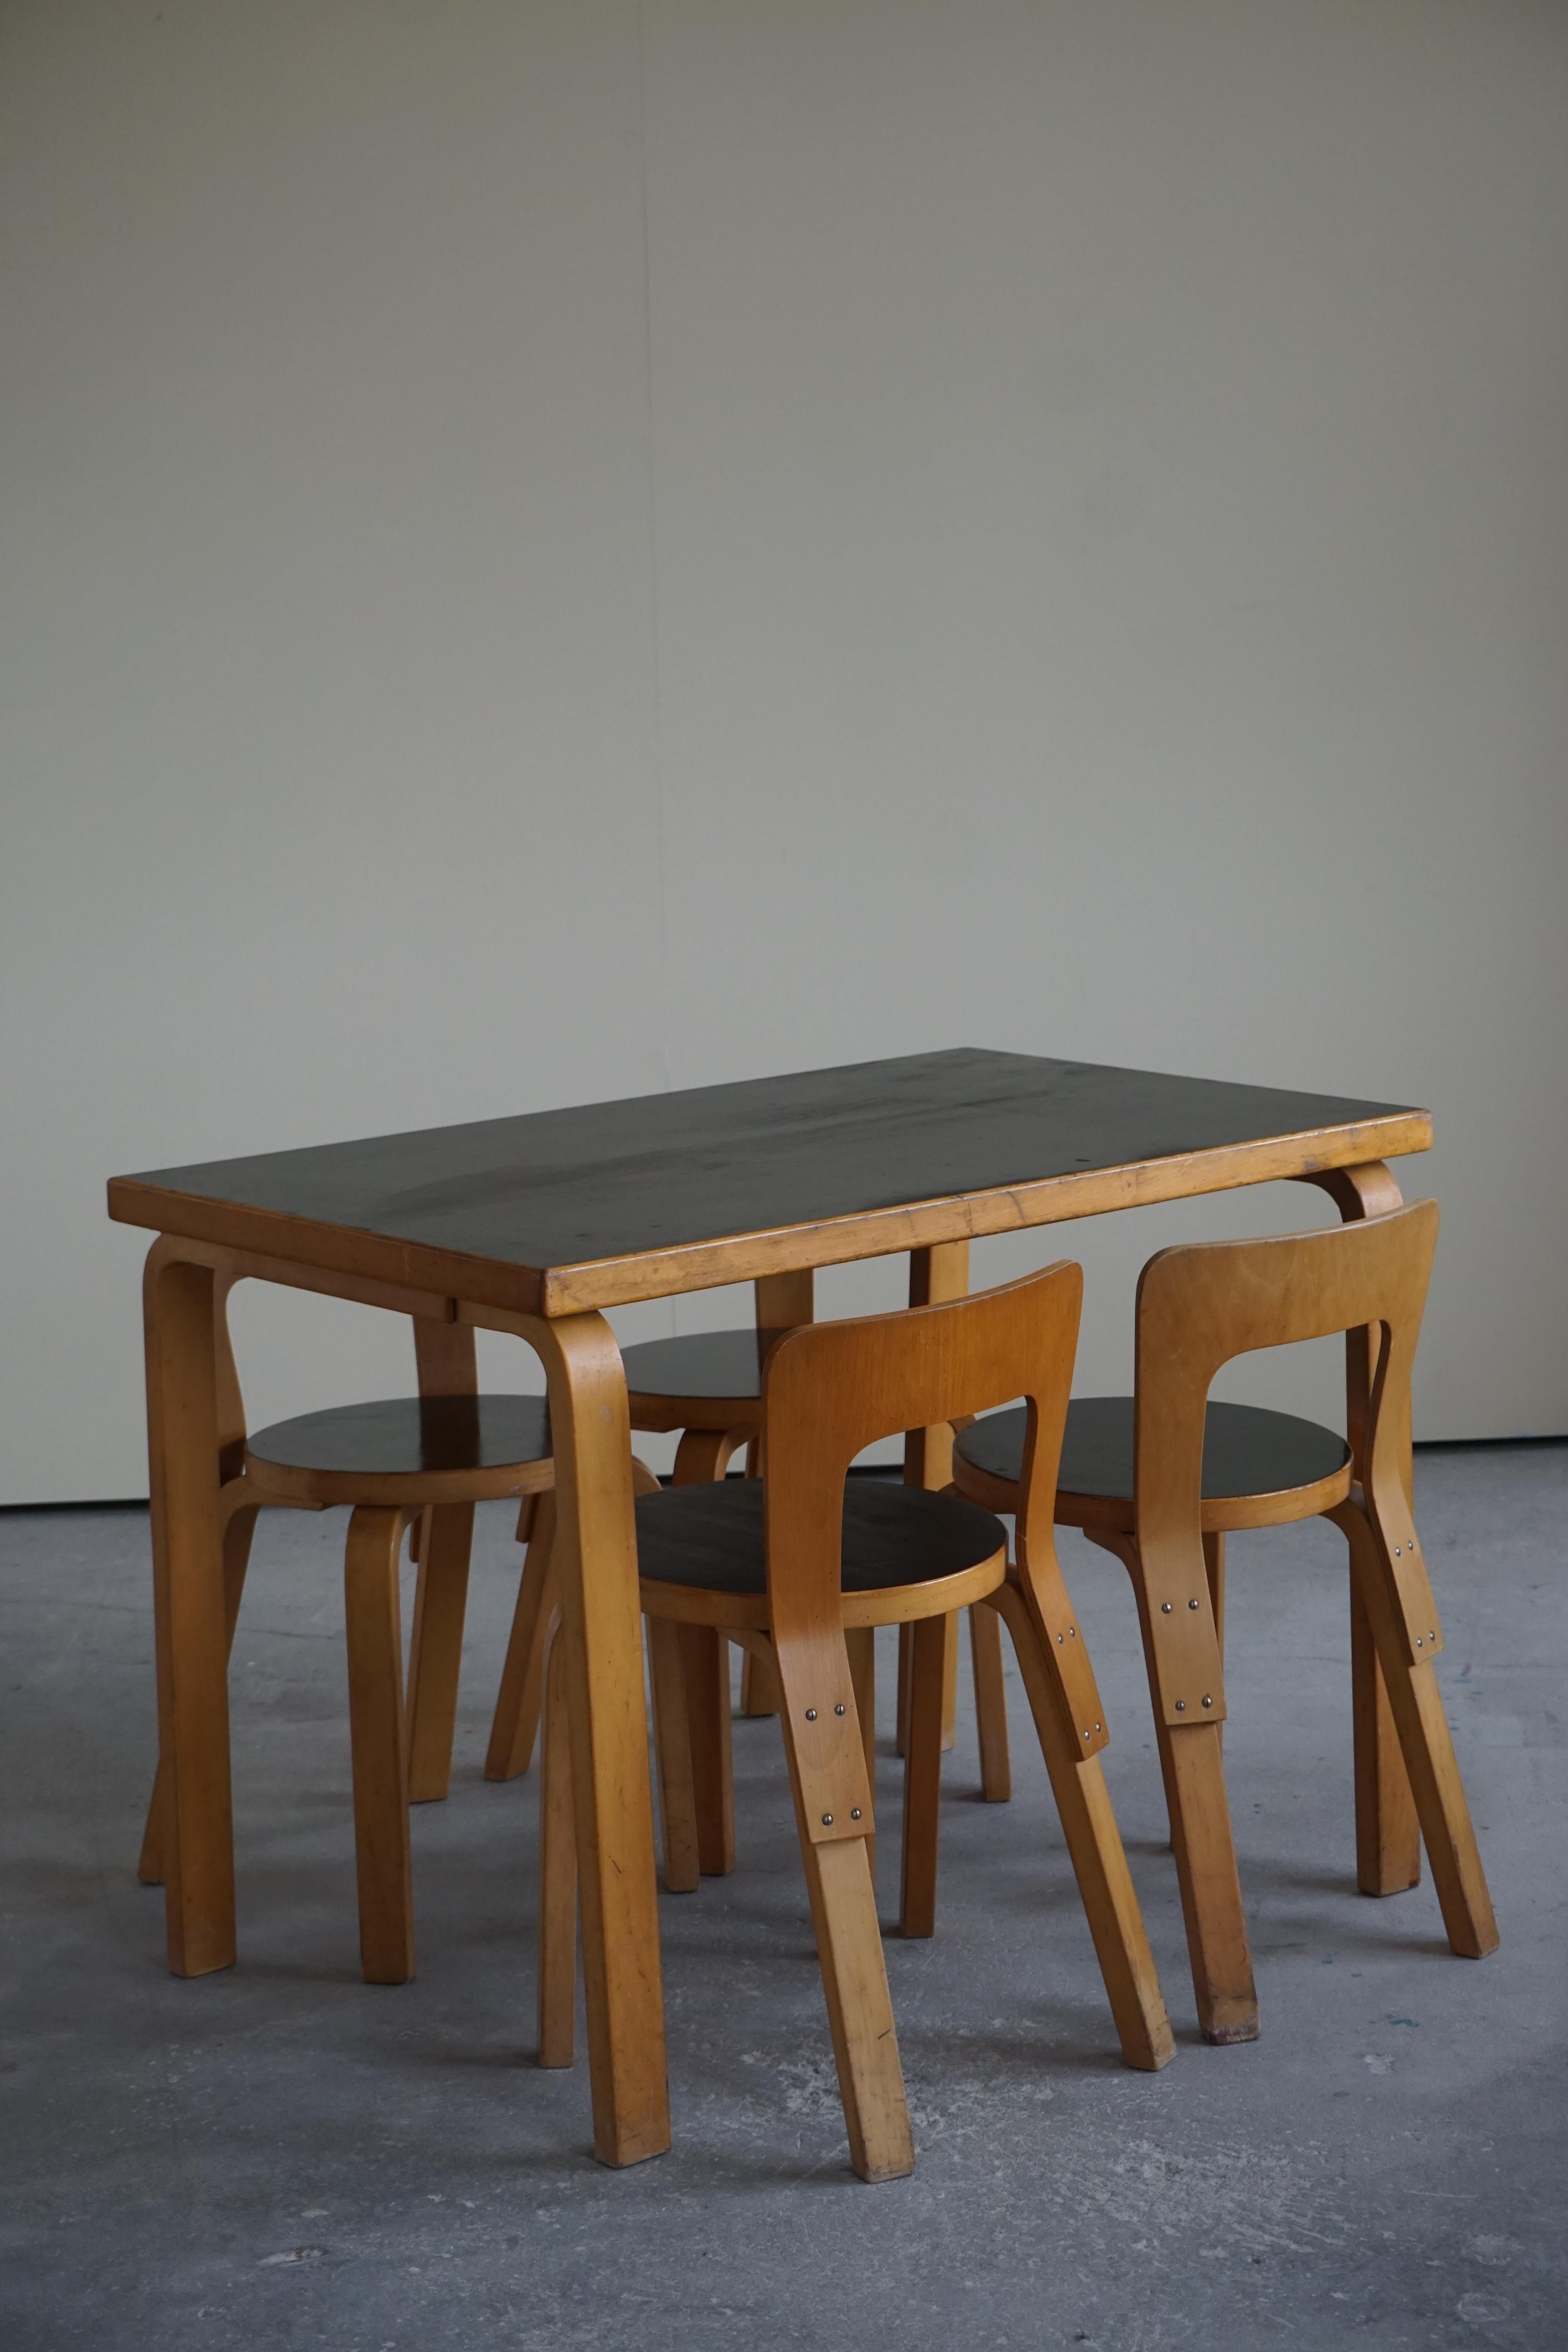 Mid century dining table in birch by Alvar Aalto for Artek Finland, circa 1950s. Model 81.

It can also be used as a office desk.
This early version is in a good original condition.